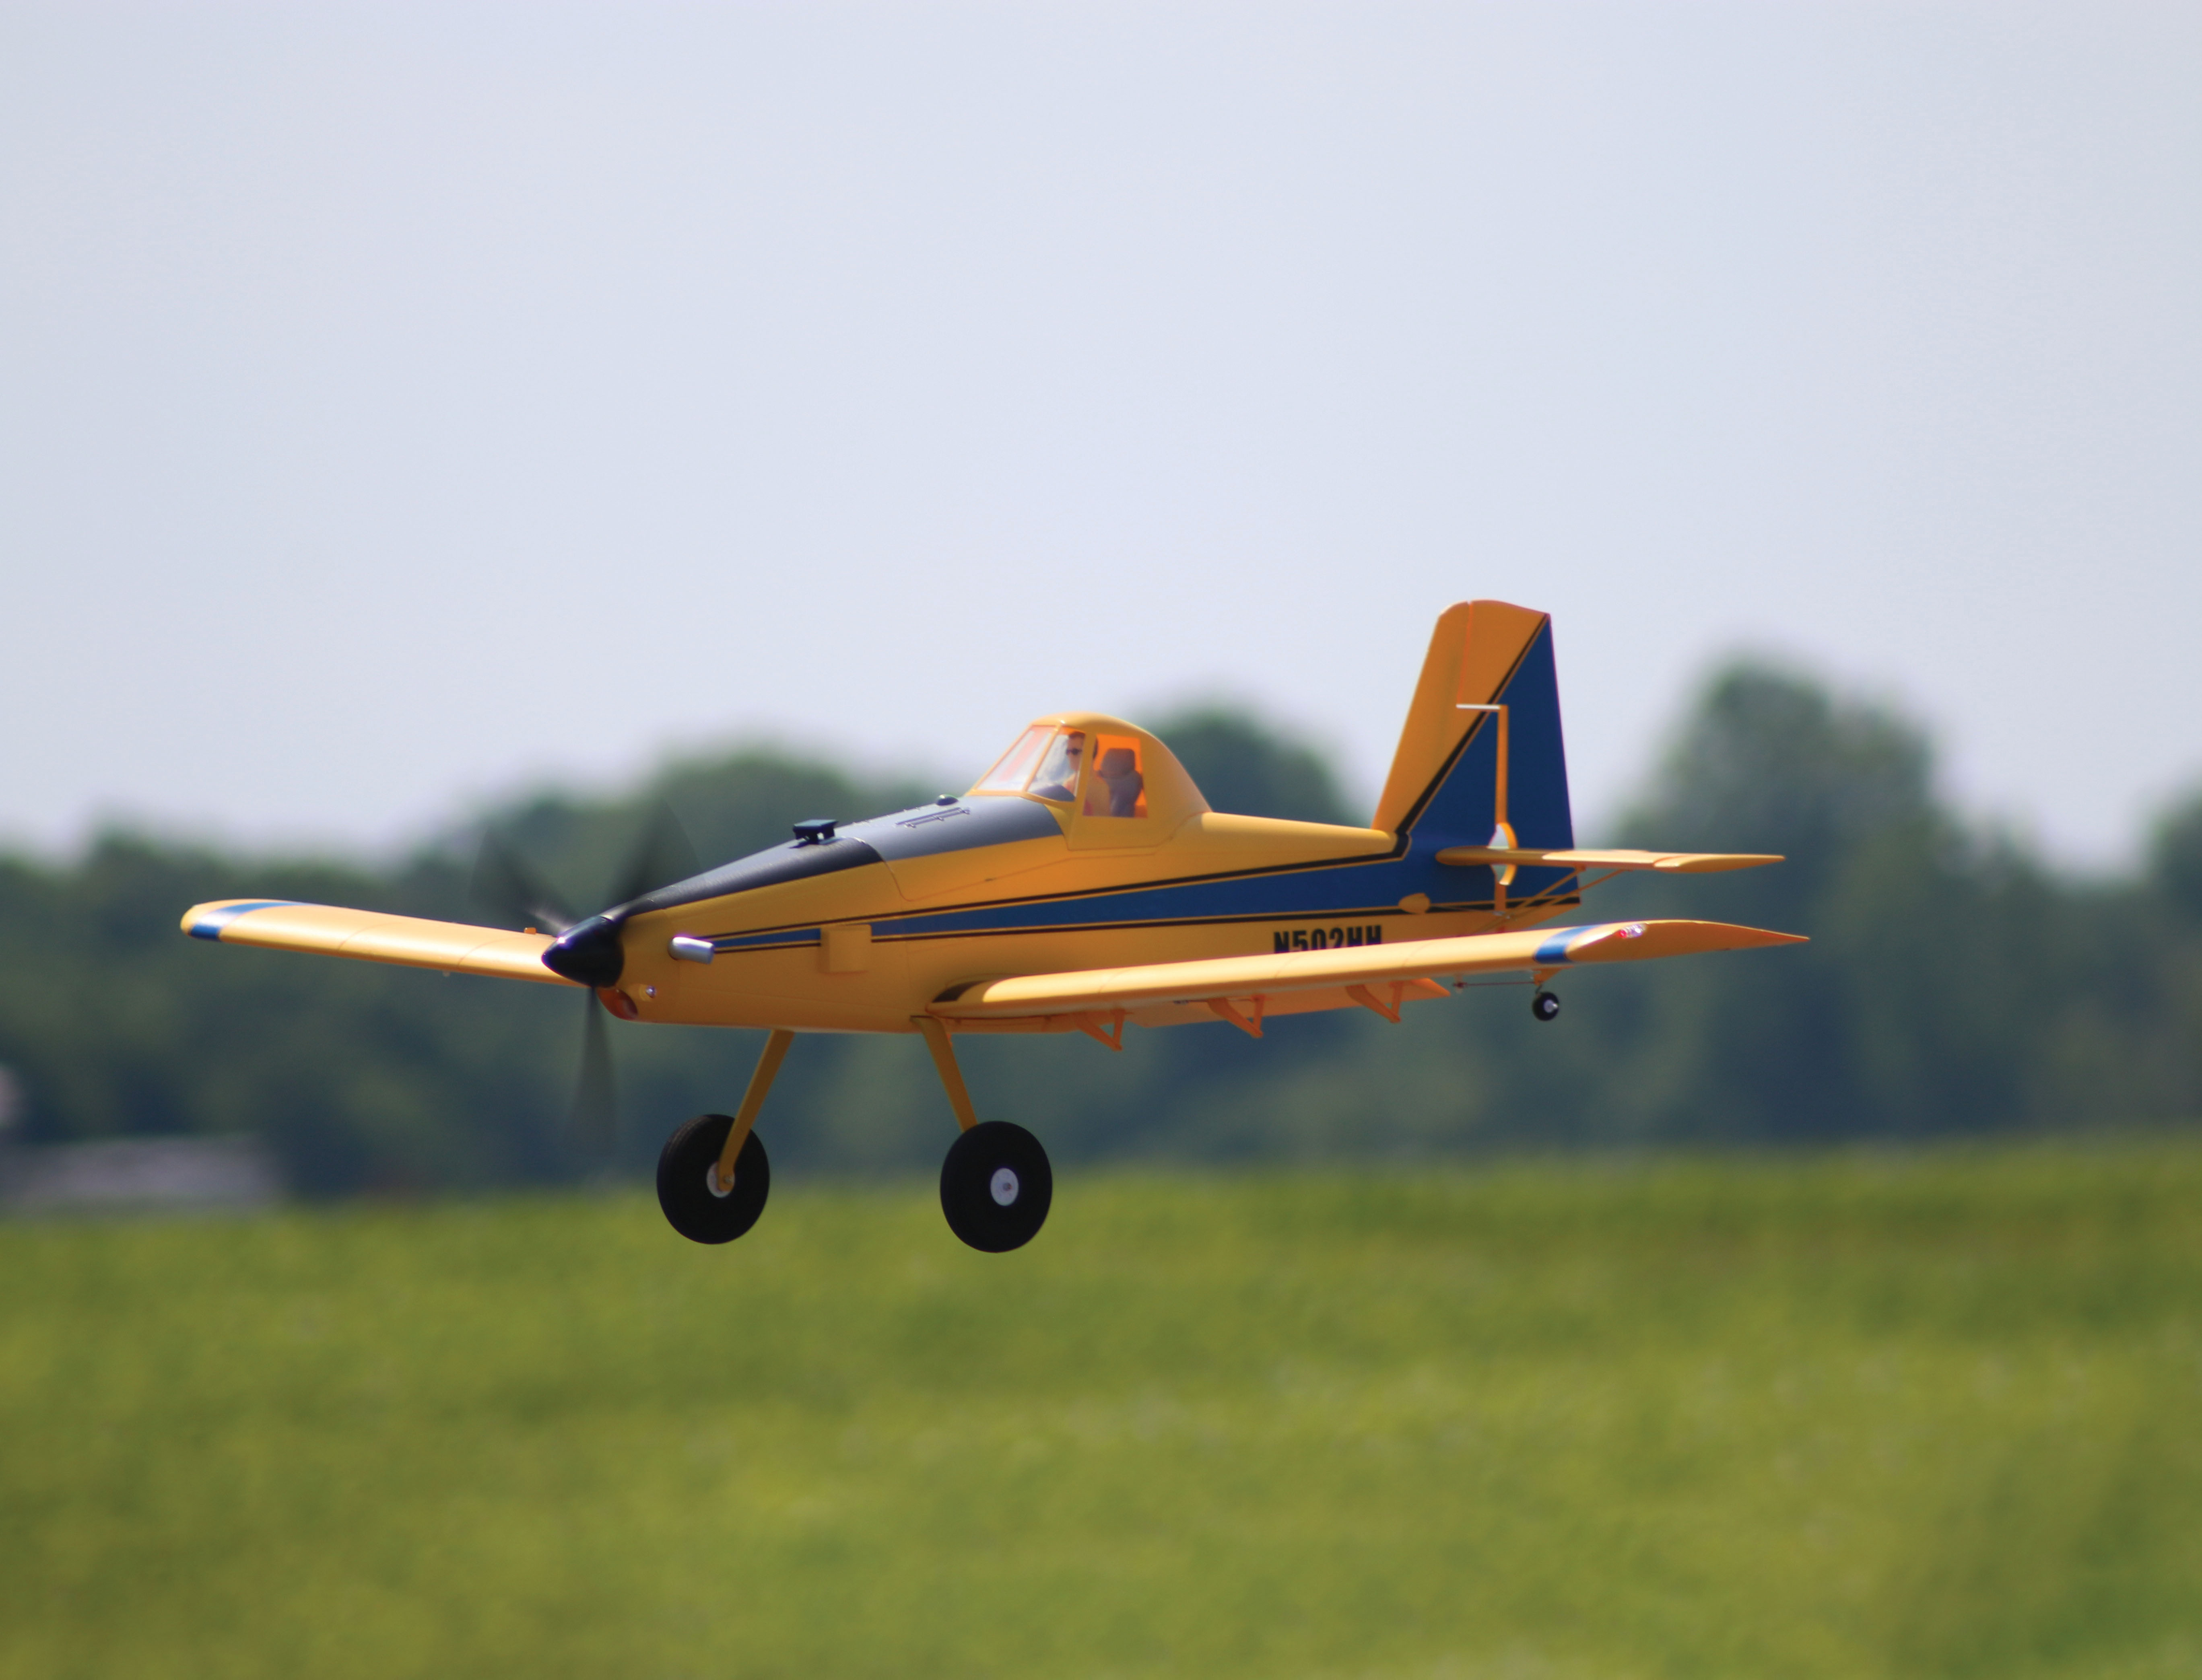 making low and slow passes with the air tractor